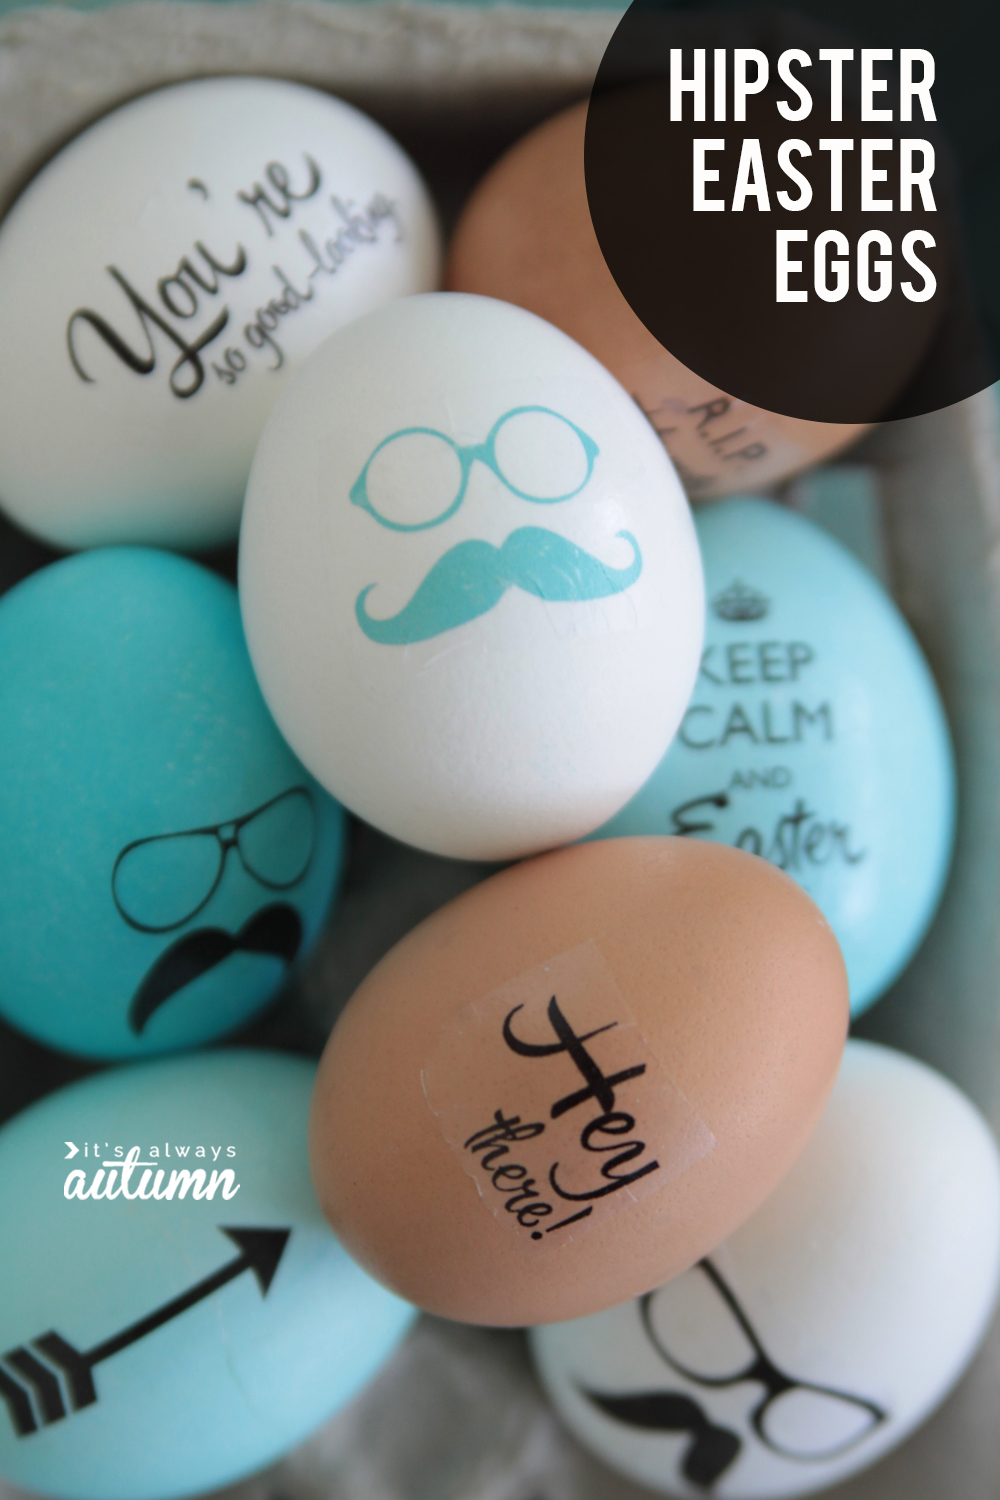 Decorate Easter eggs with cute hipster sayings using temporary tattoo paper!